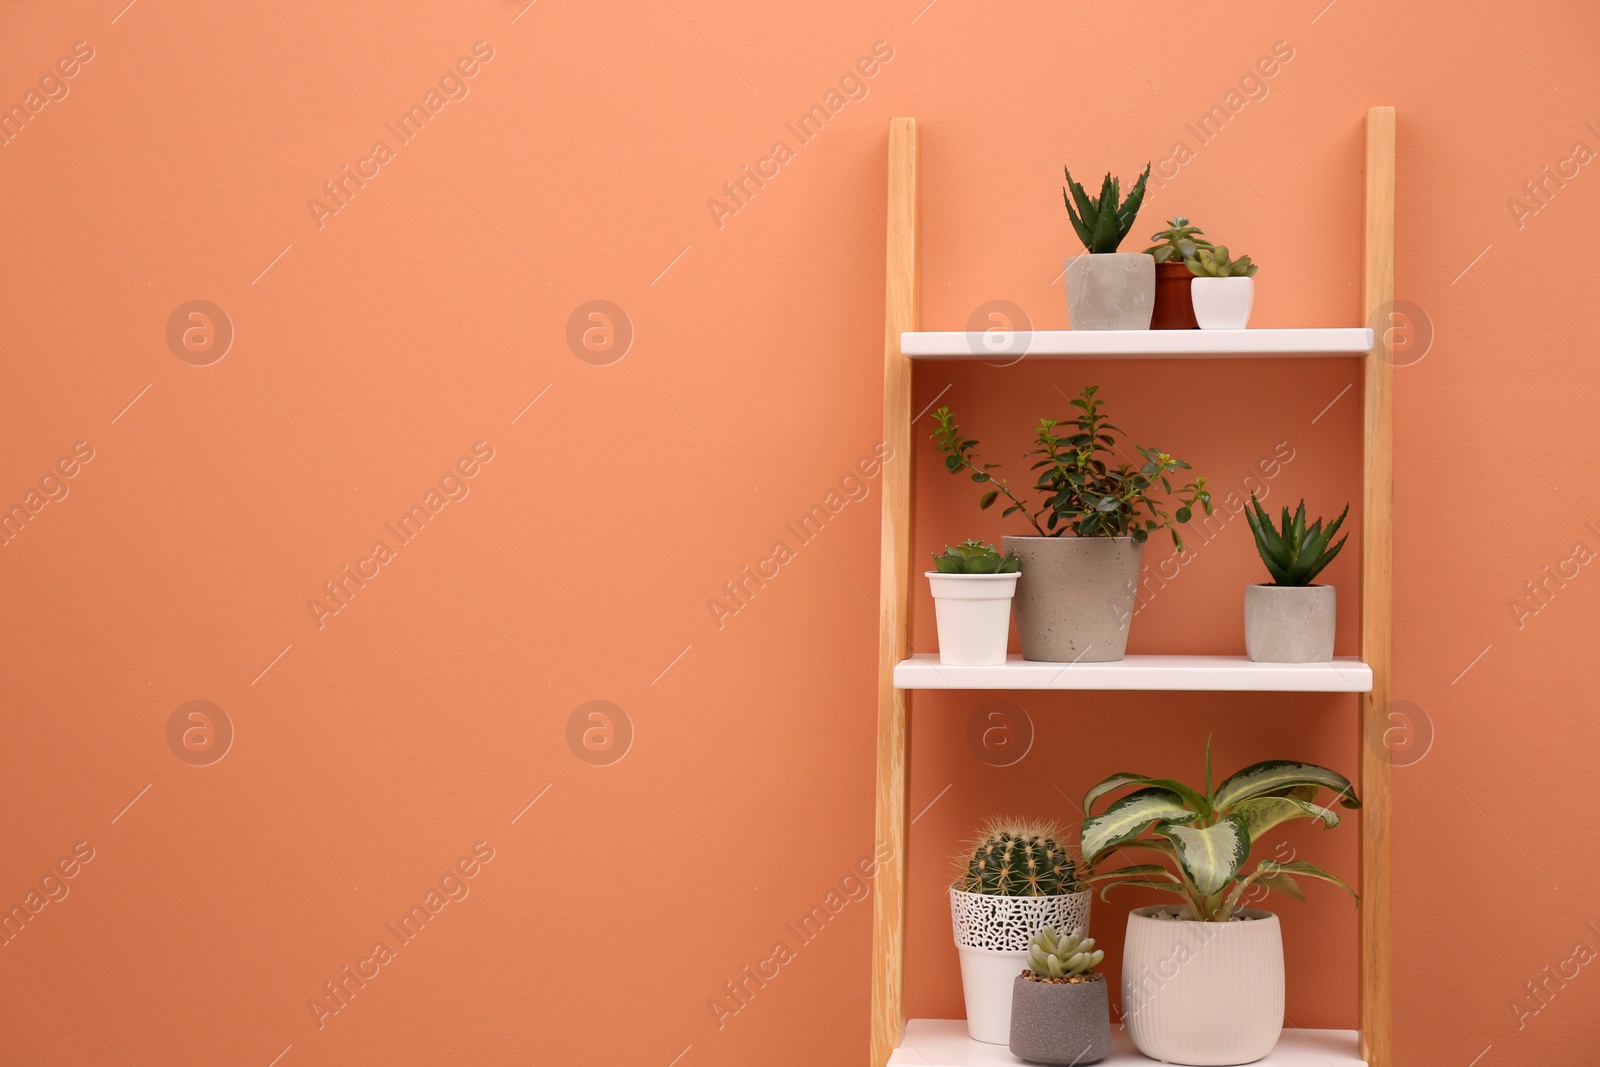 Photo of Decorative ladder and plants near coral wall. Space for text